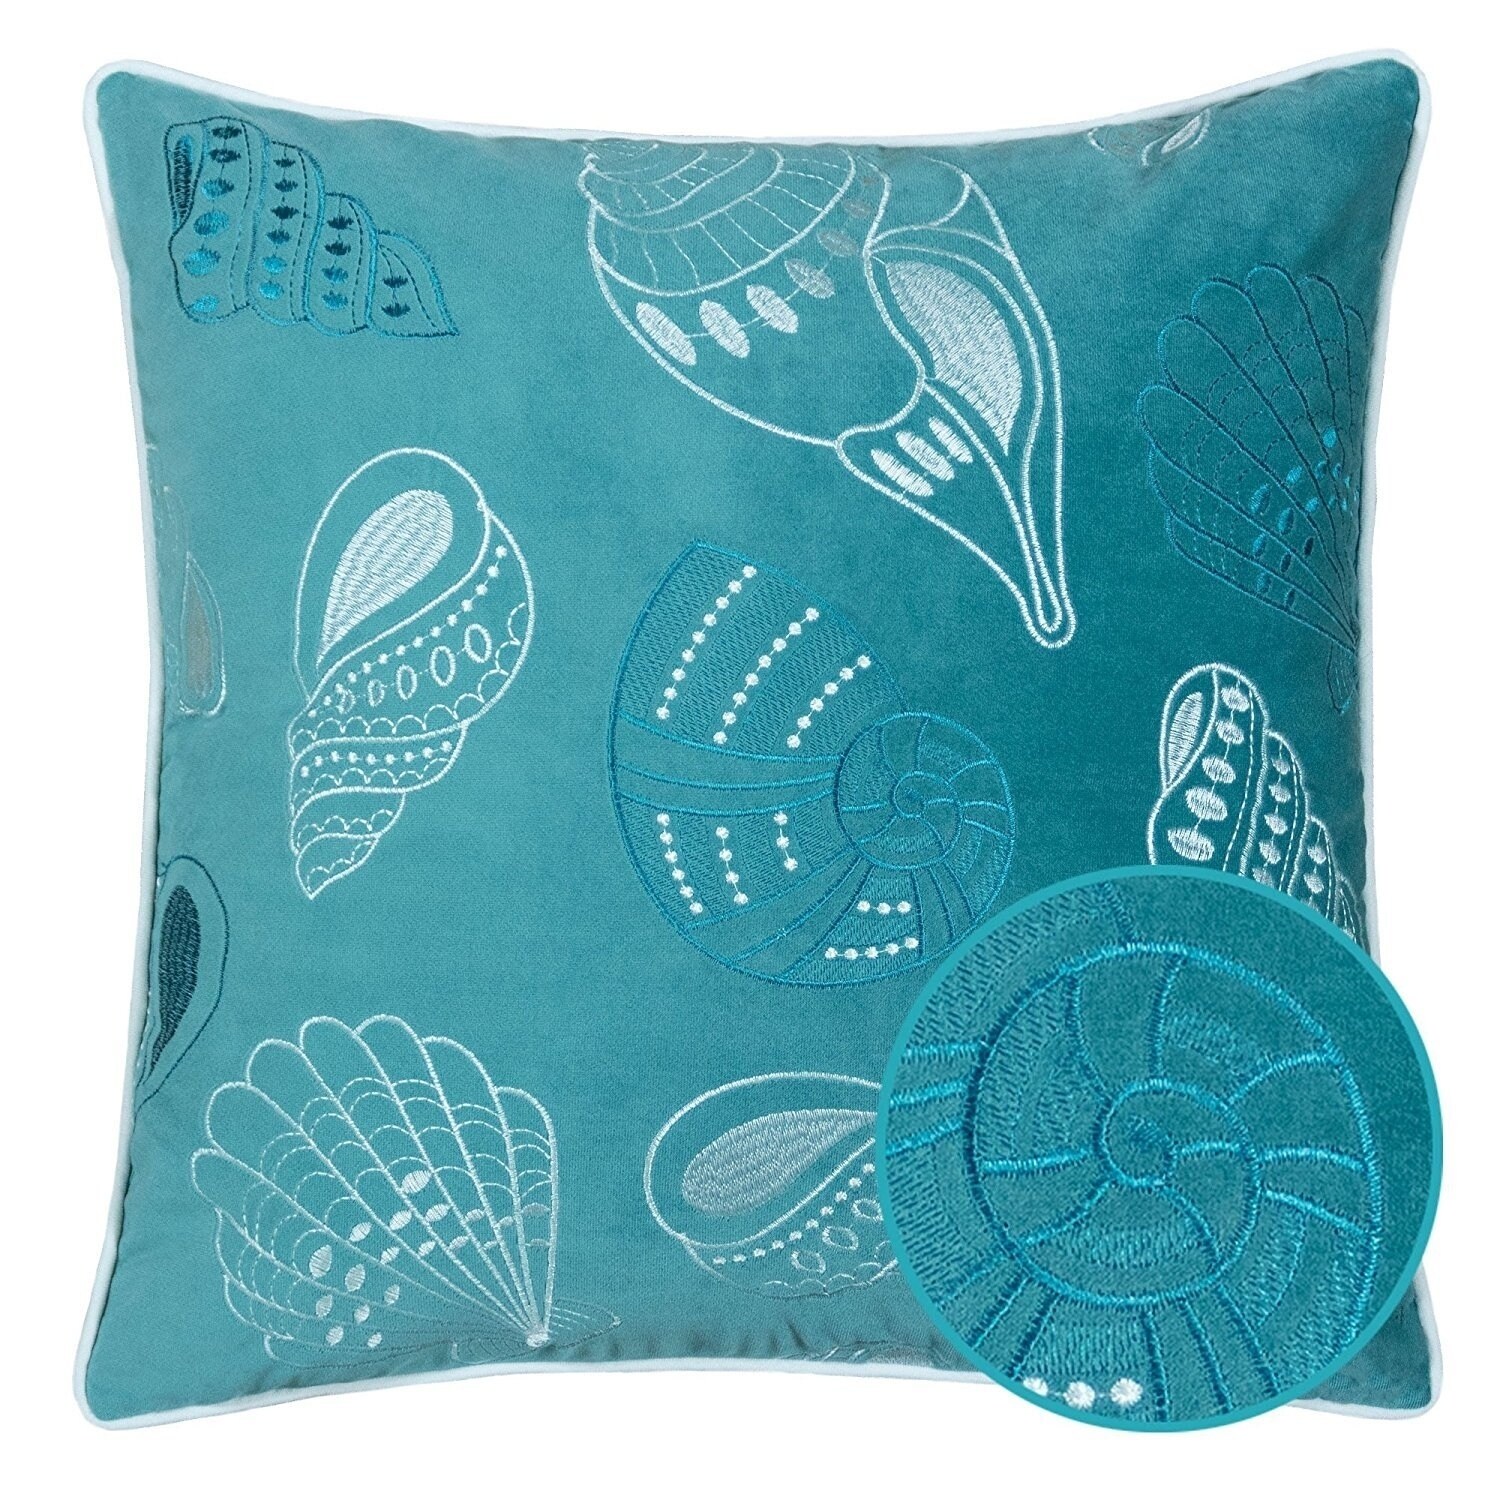 PILLOWS NAVY "COASTAL TREASURES" TUFTED INDOOR OUTDOOR PILLOW 18" SQUARE 